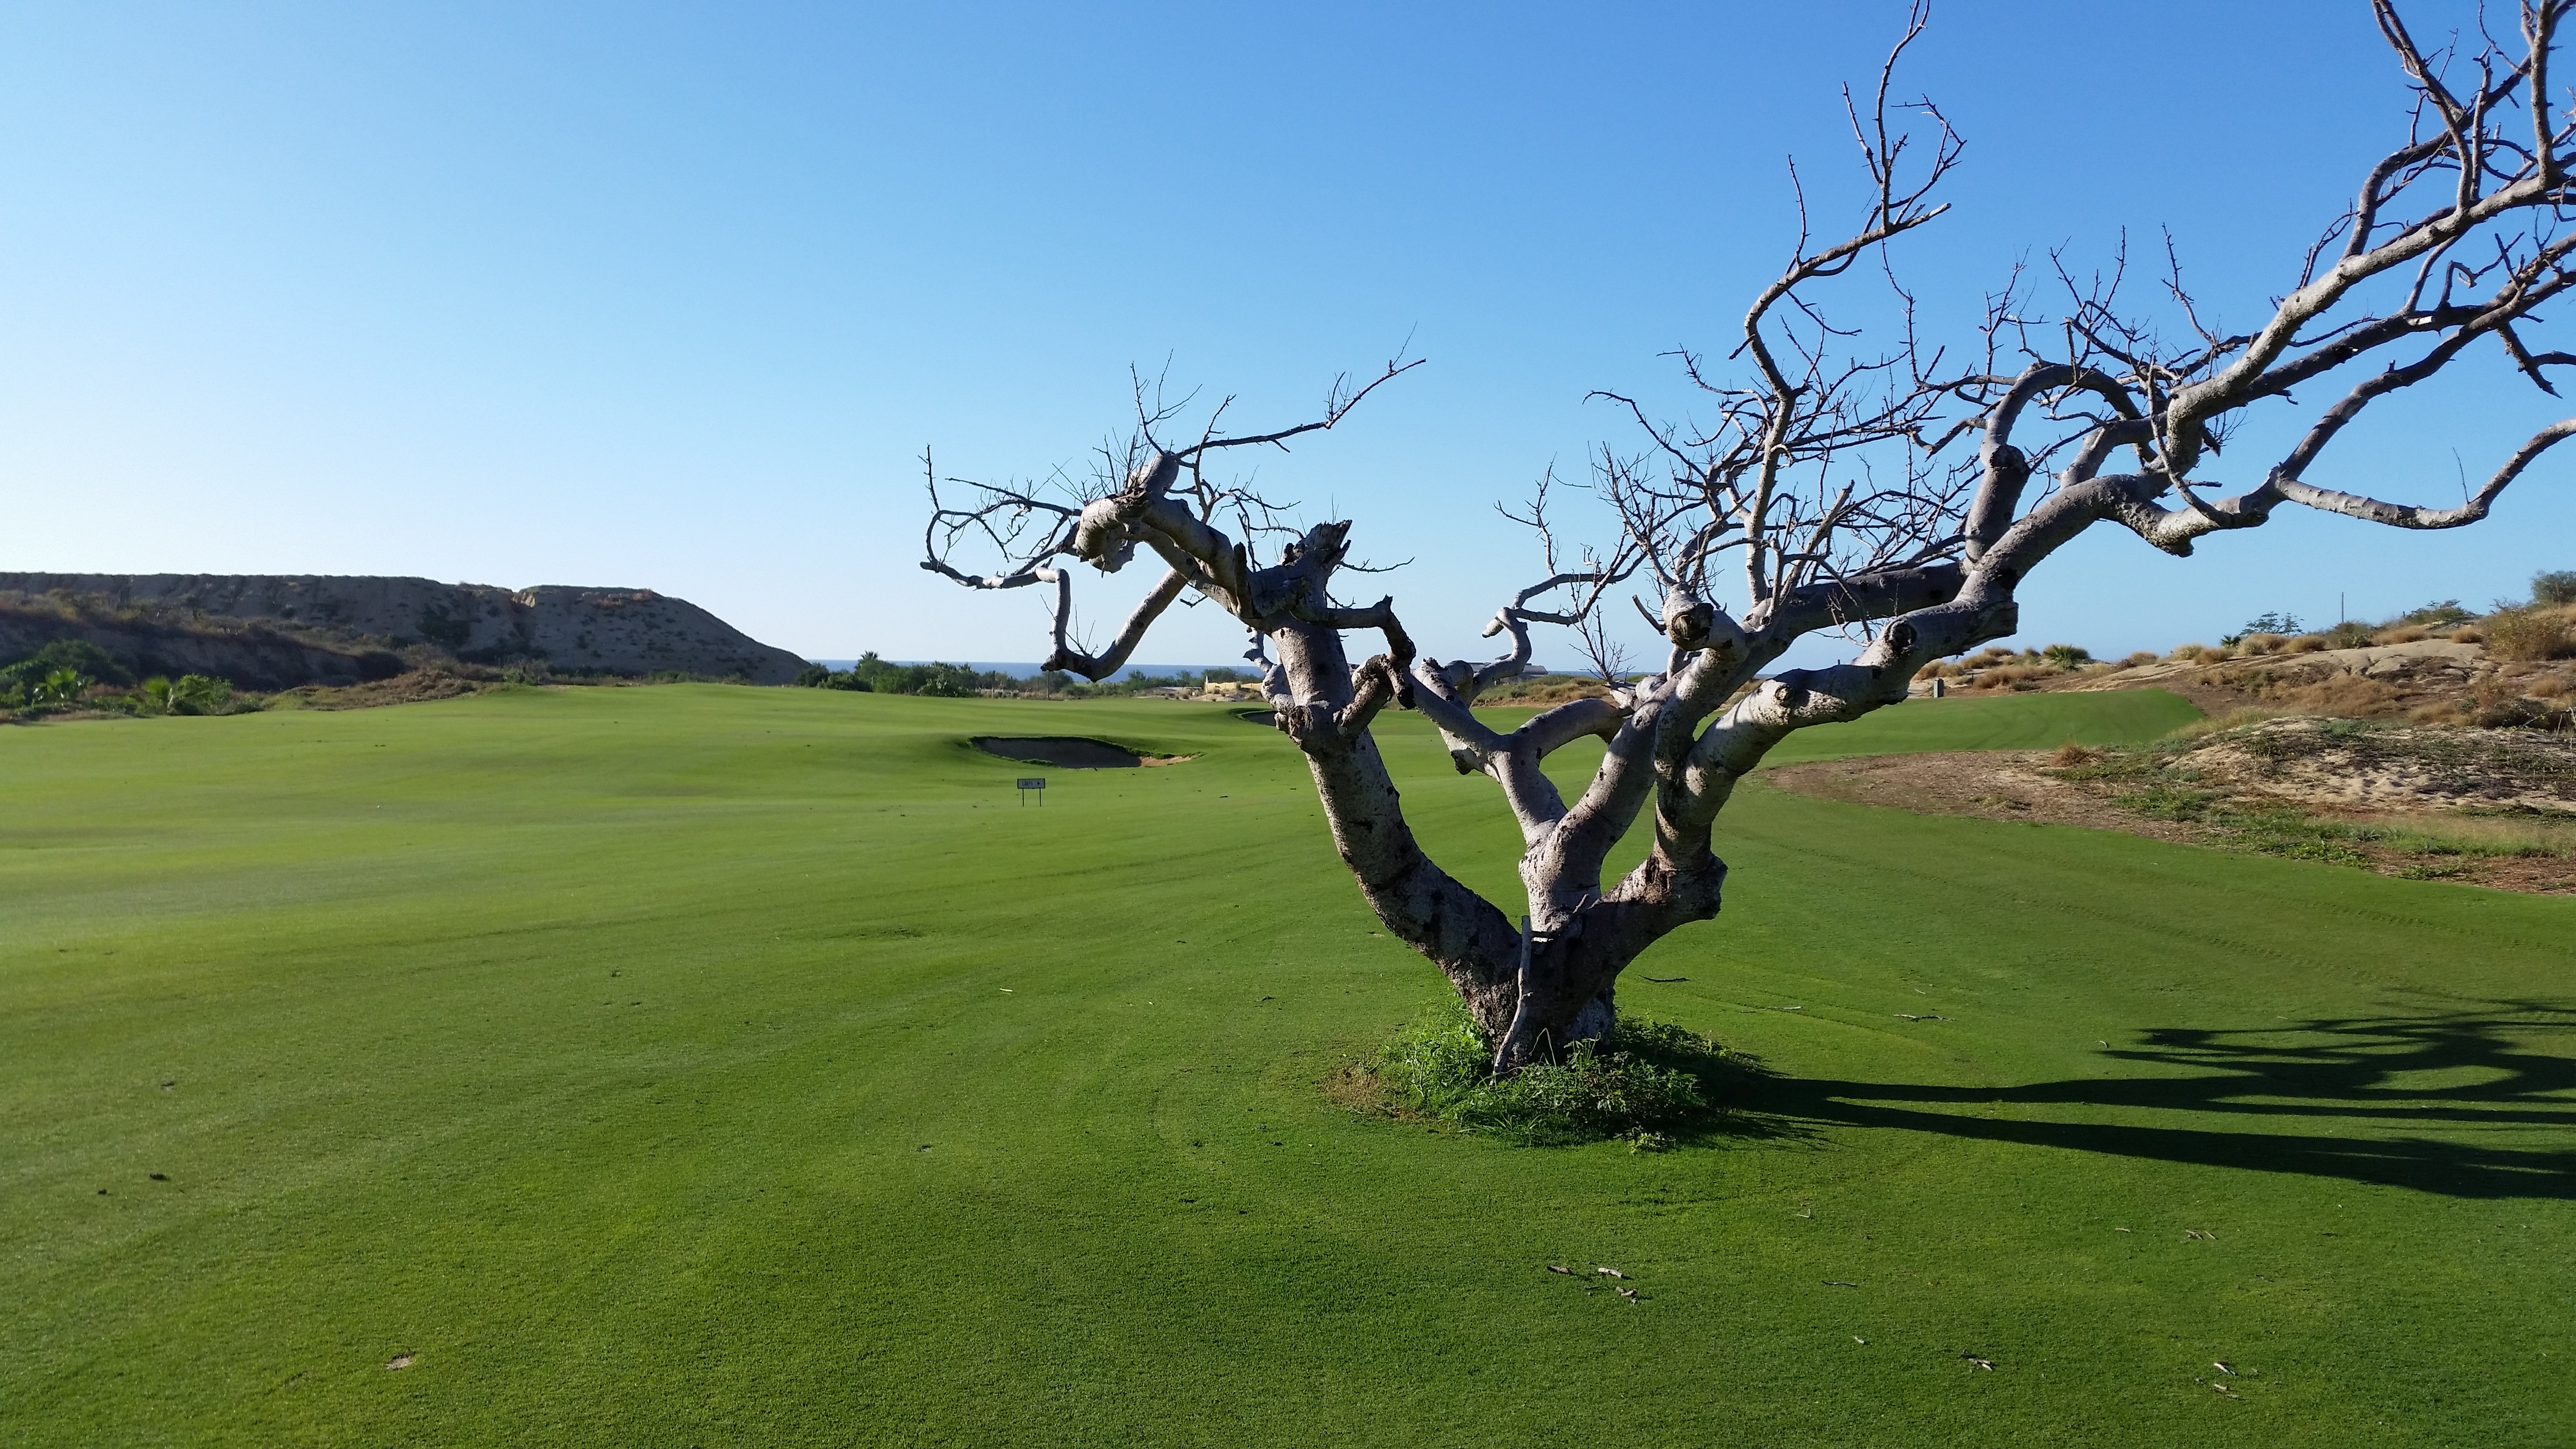 Neverending photo opportunities at Quivira (Photo by Rick Stedman)